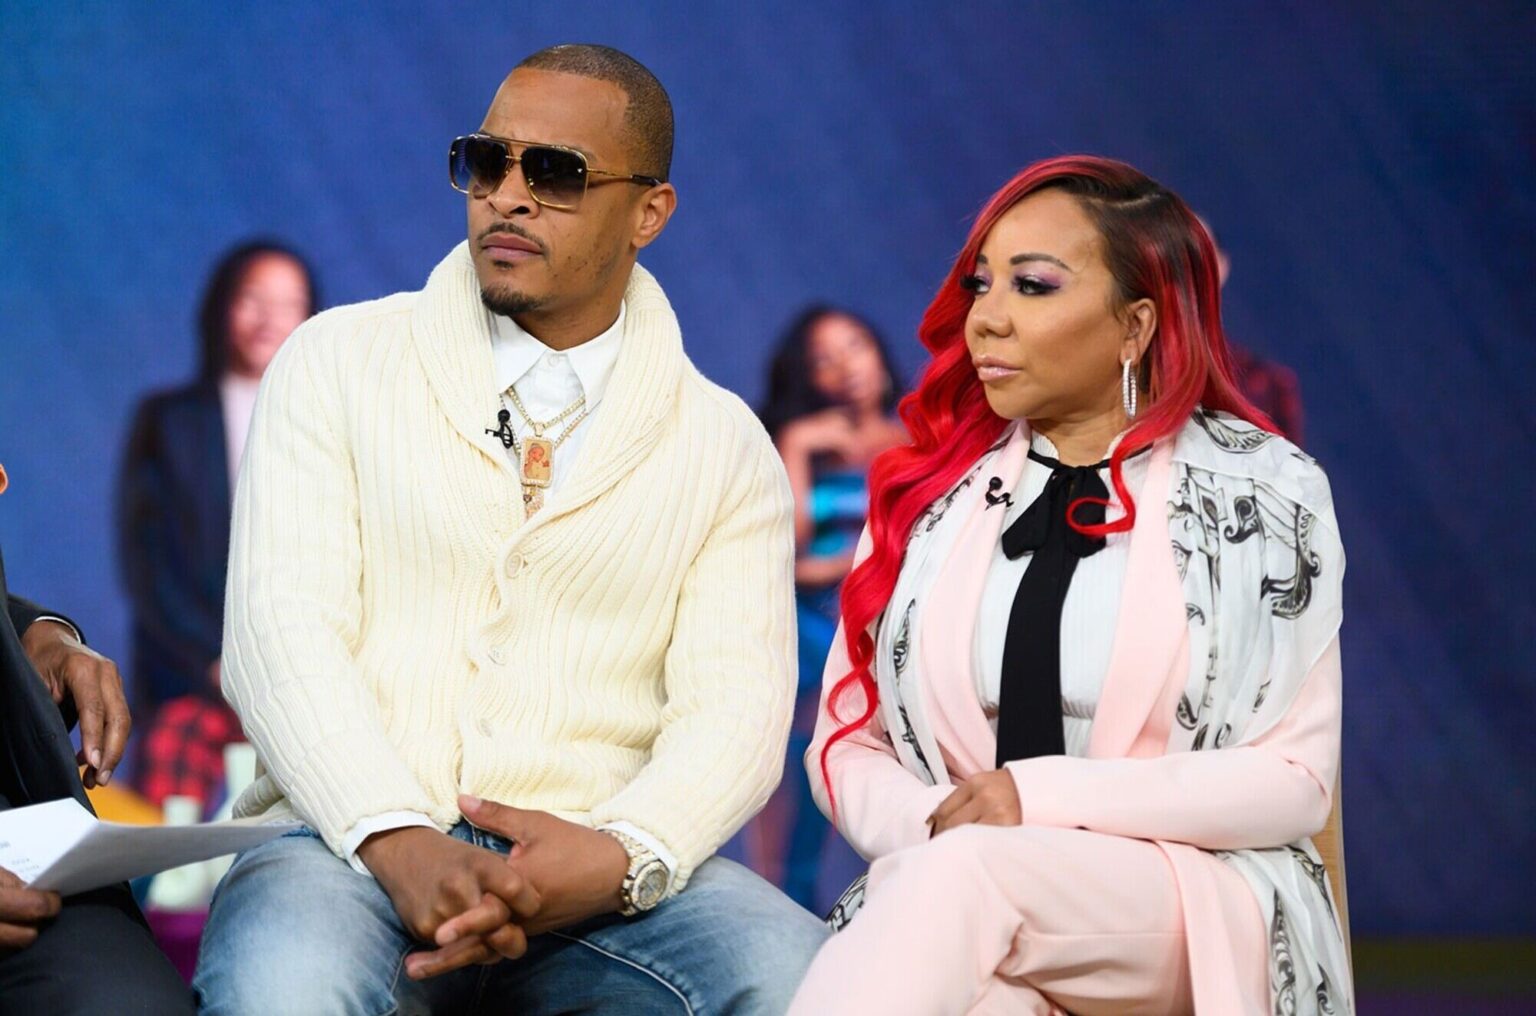 Are T.I. and Tiny sex offenders? Social media definitely thinks so. Here's everything we know about Sabrina Peterson's accusations against the couple.